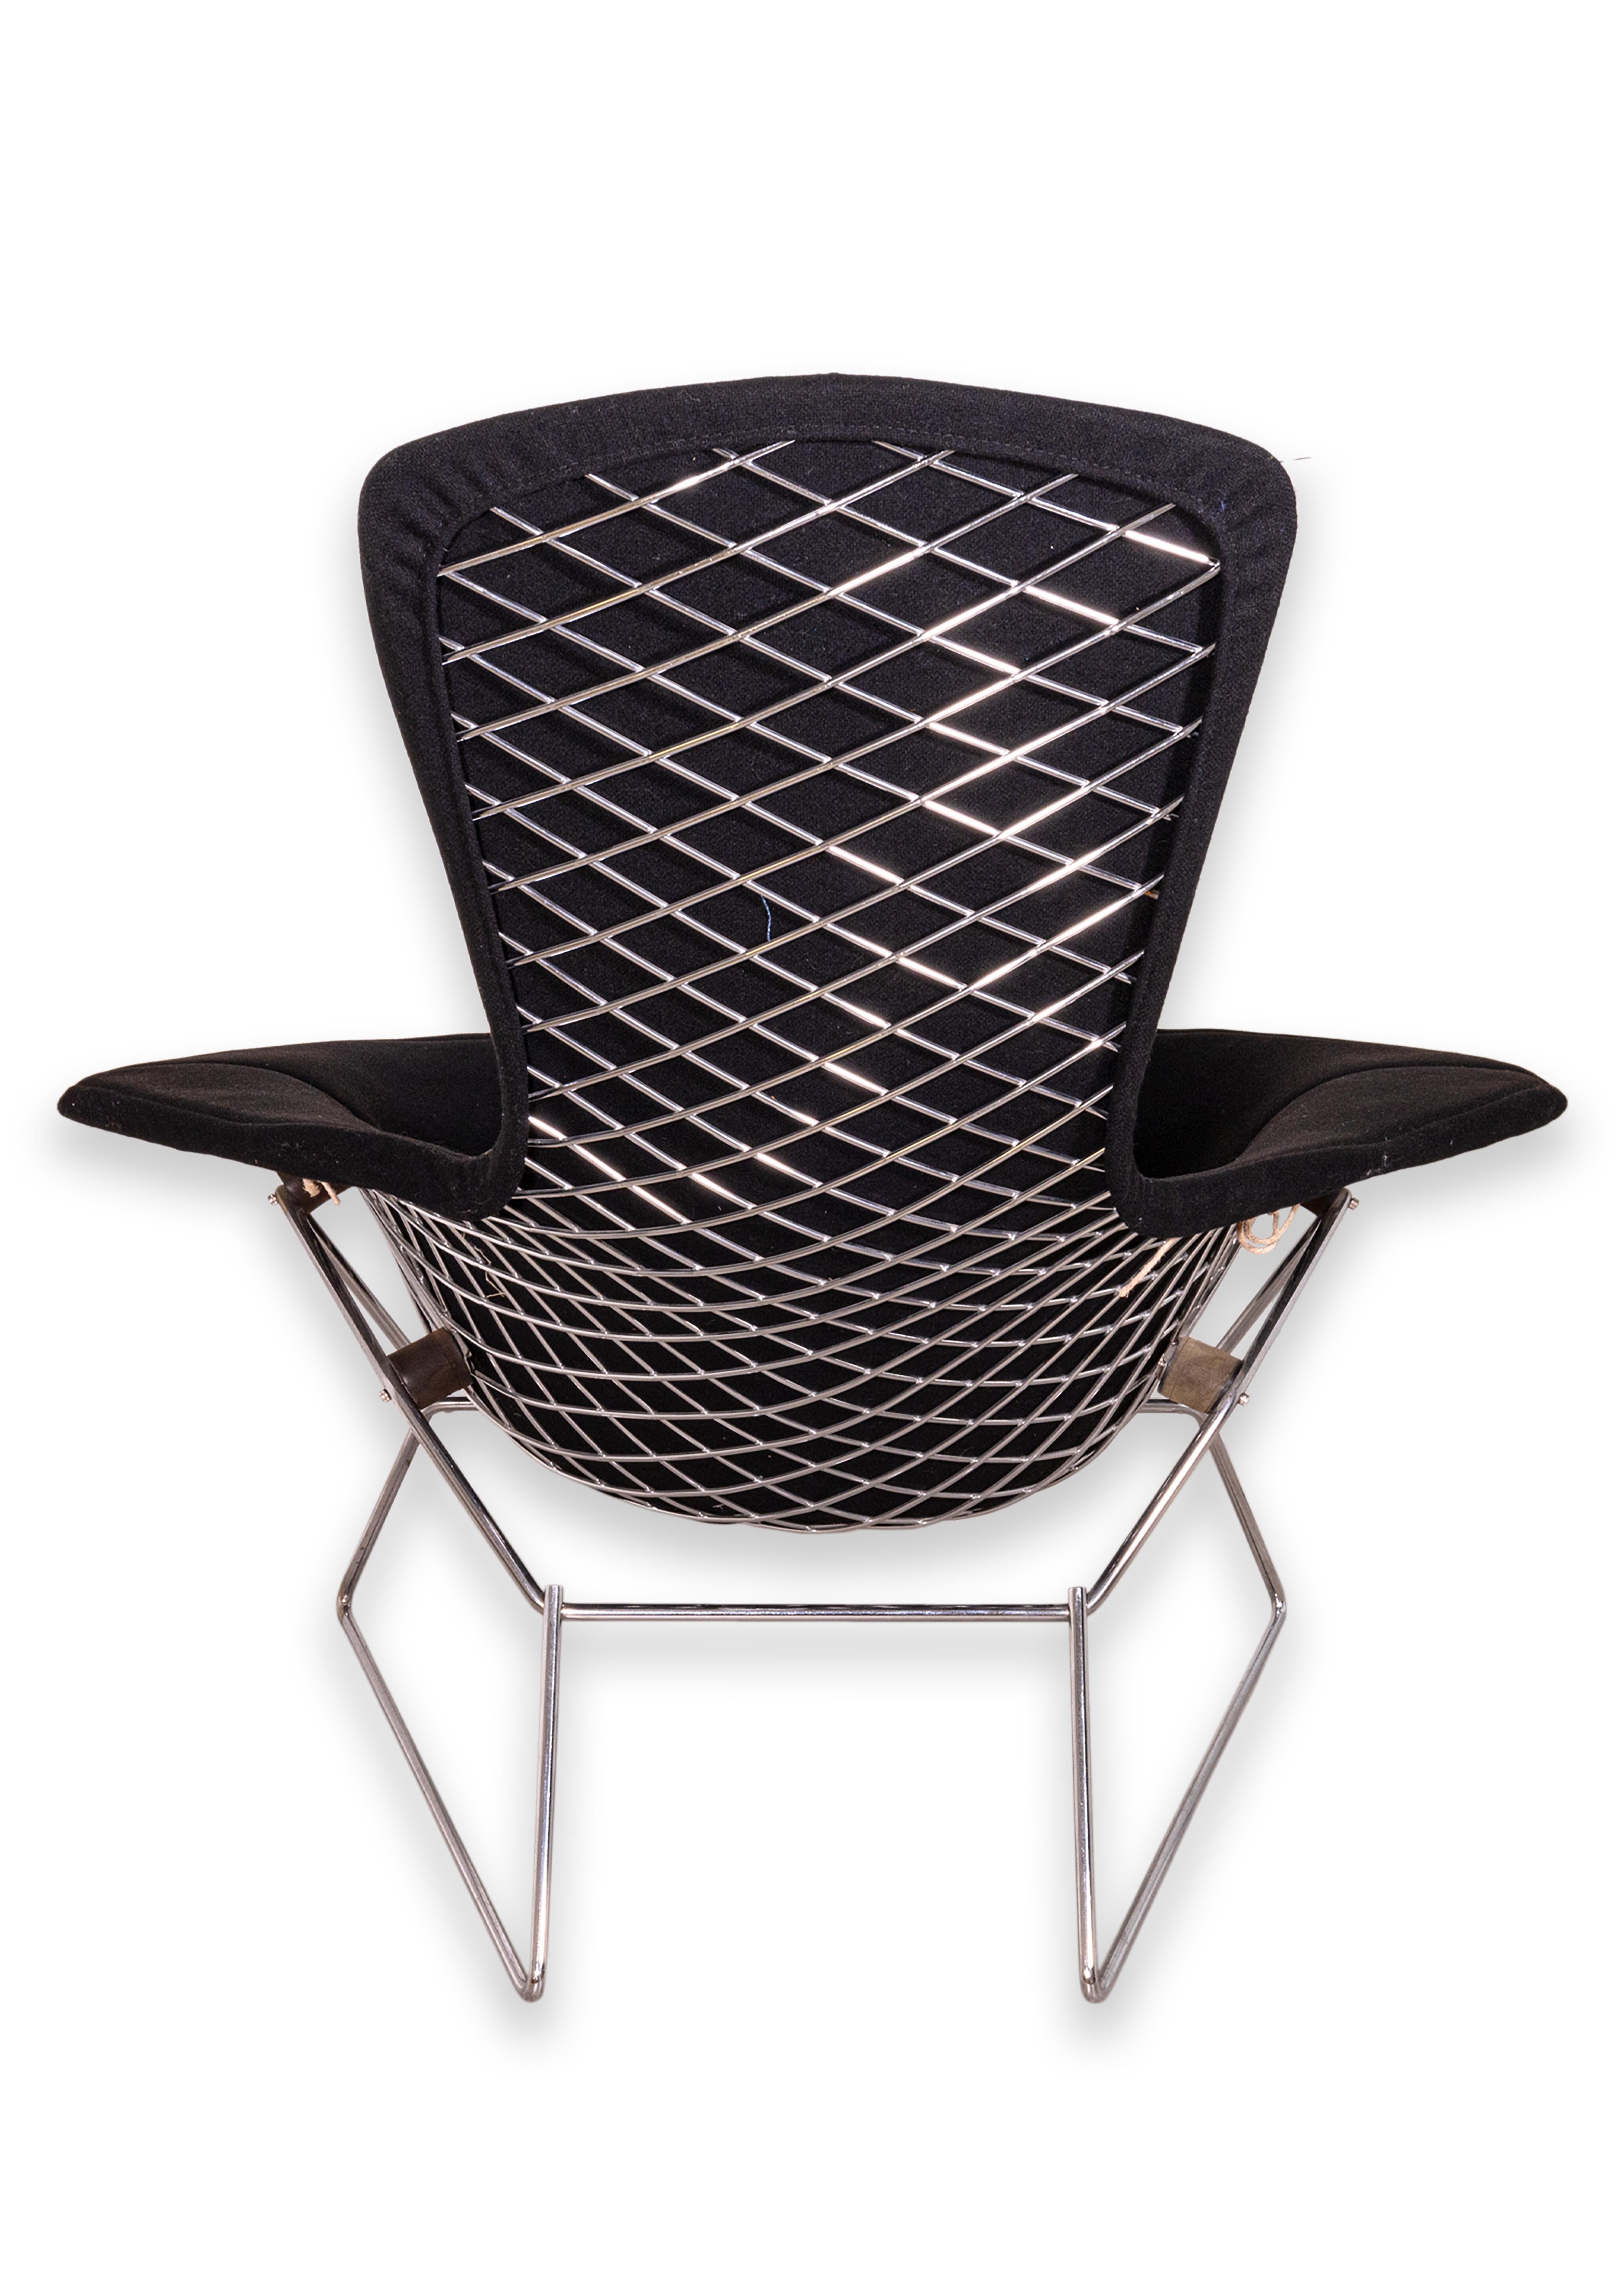 Harry Bertoia for Knoll Bird Chair & Ottoman with Black Upholstery Original 60s In Good Condition For Sale In Keego Harbor, MI